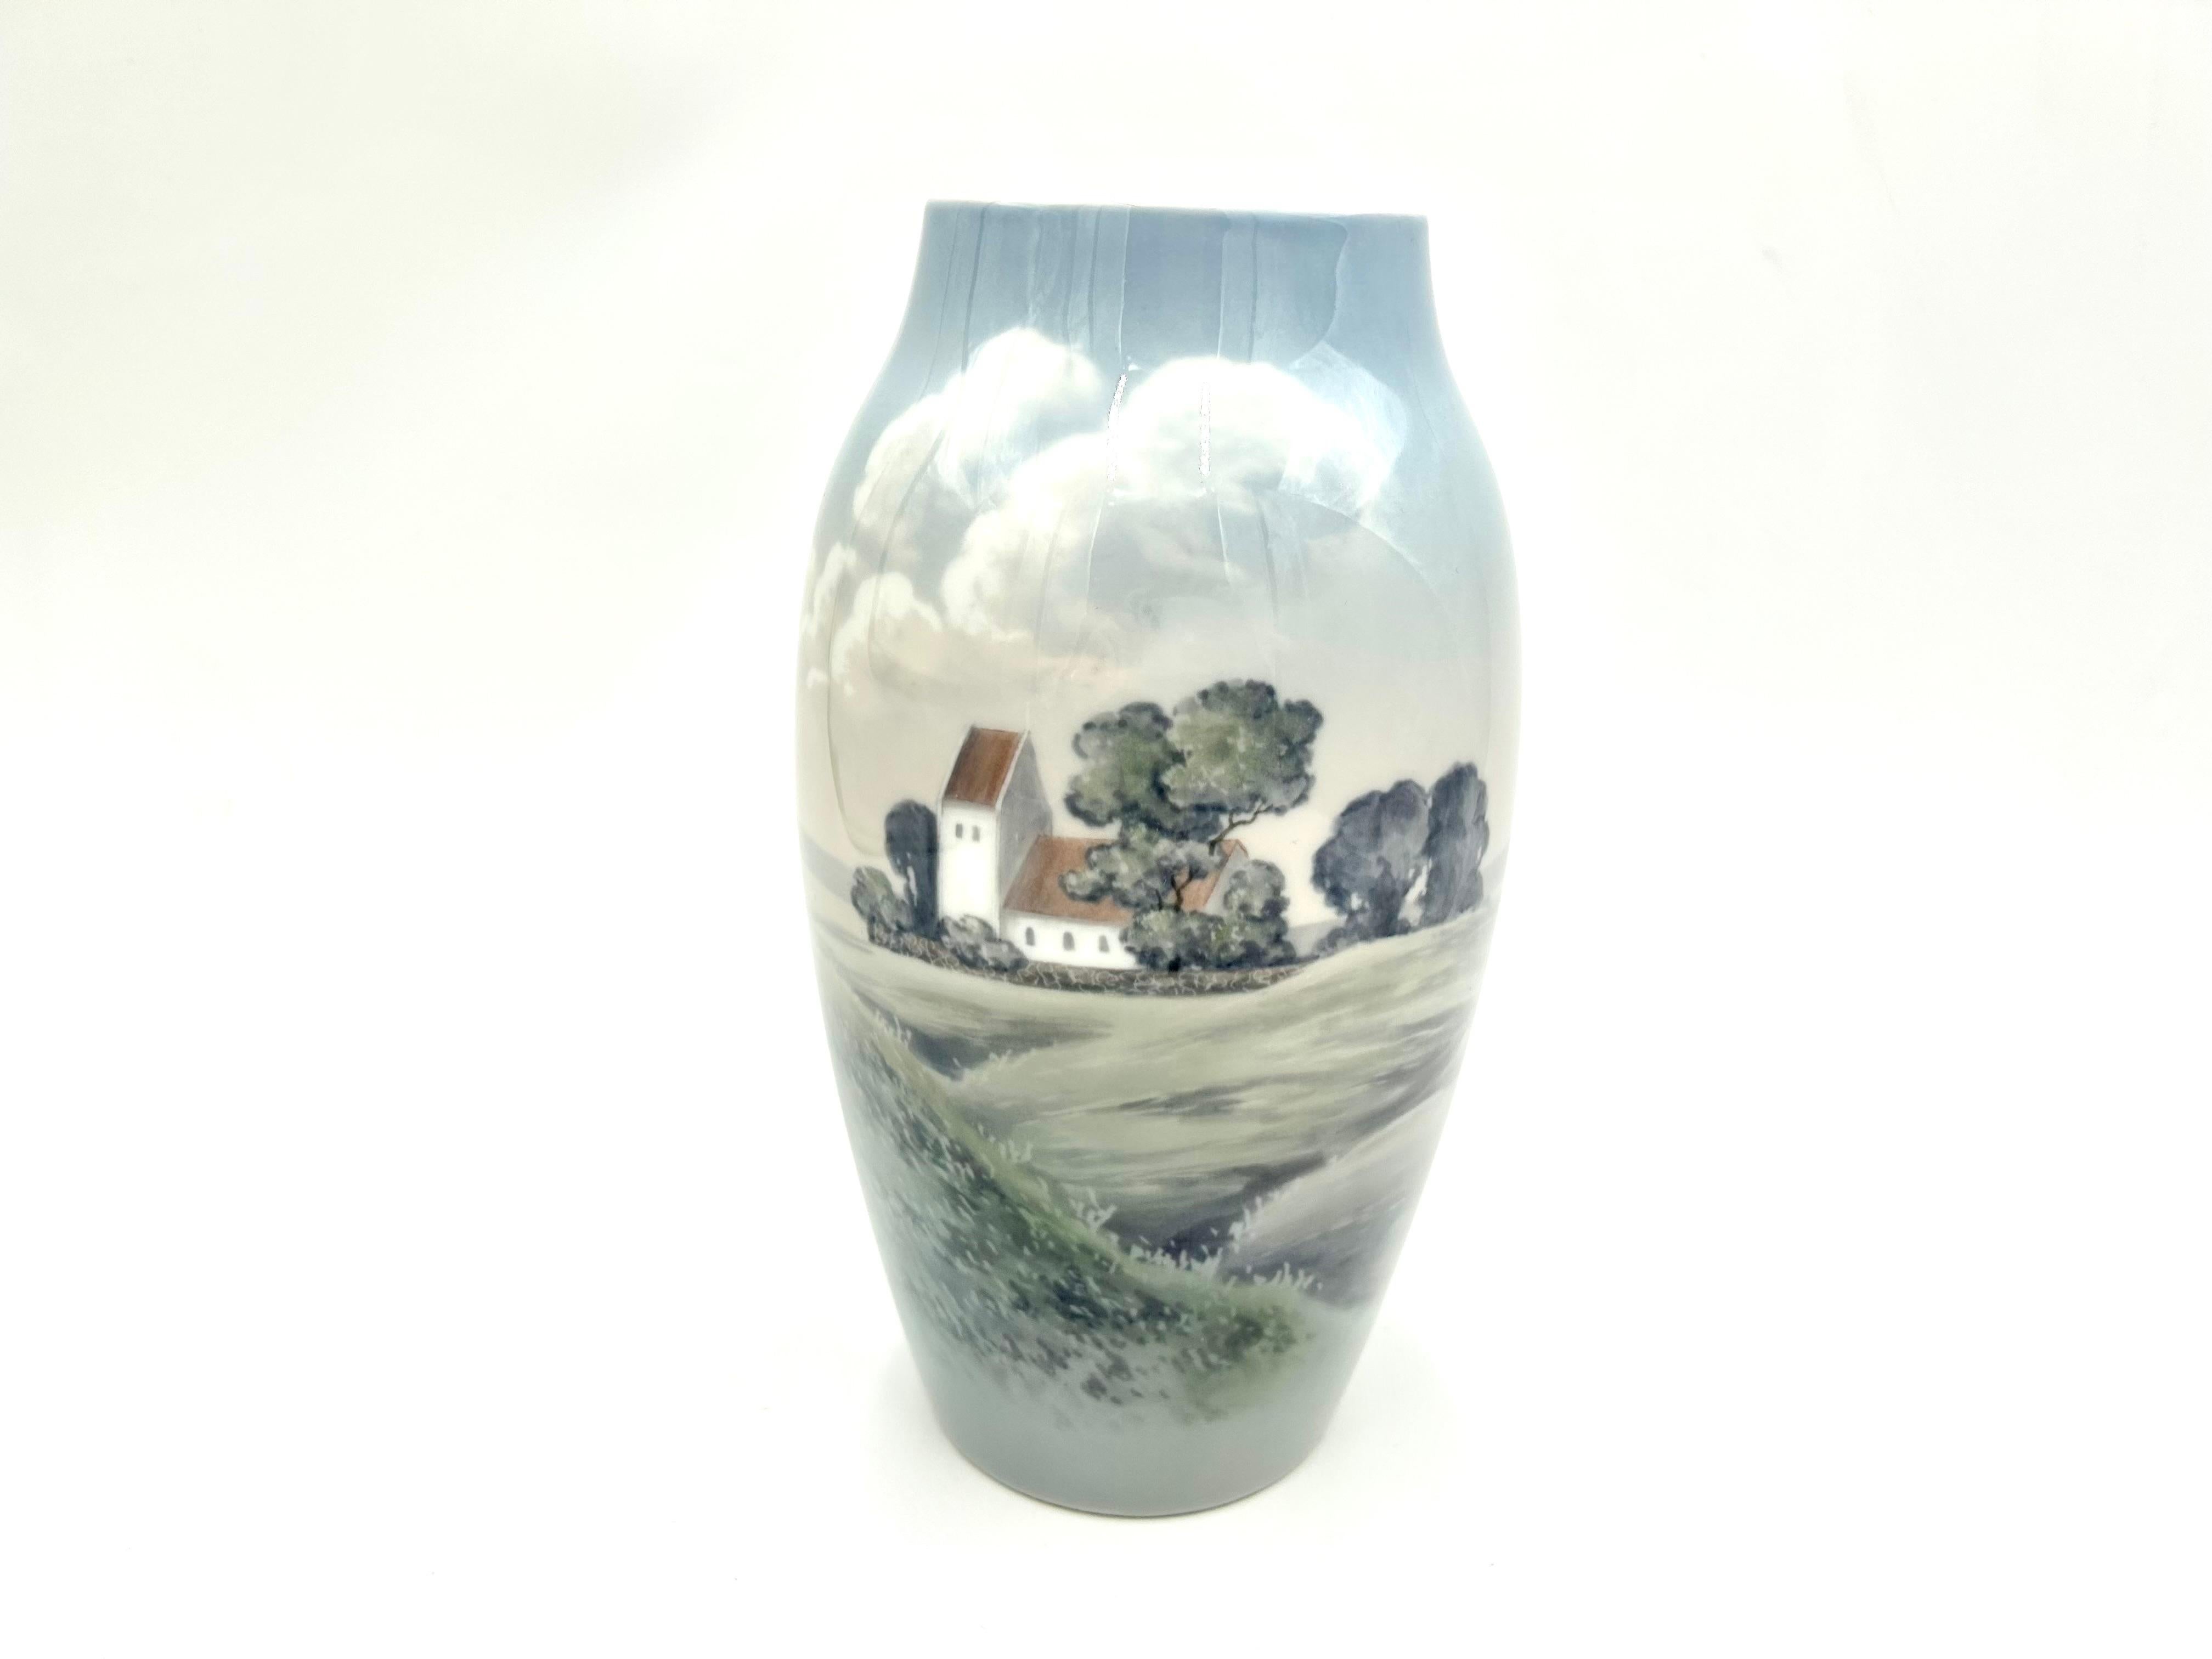 Porcelain vase with a rural view.

Produced by the Danish manufactory Bing & Grondahl in the 1960s.

Very good condition

Measure: height: 25cm

diameter: 10cm.